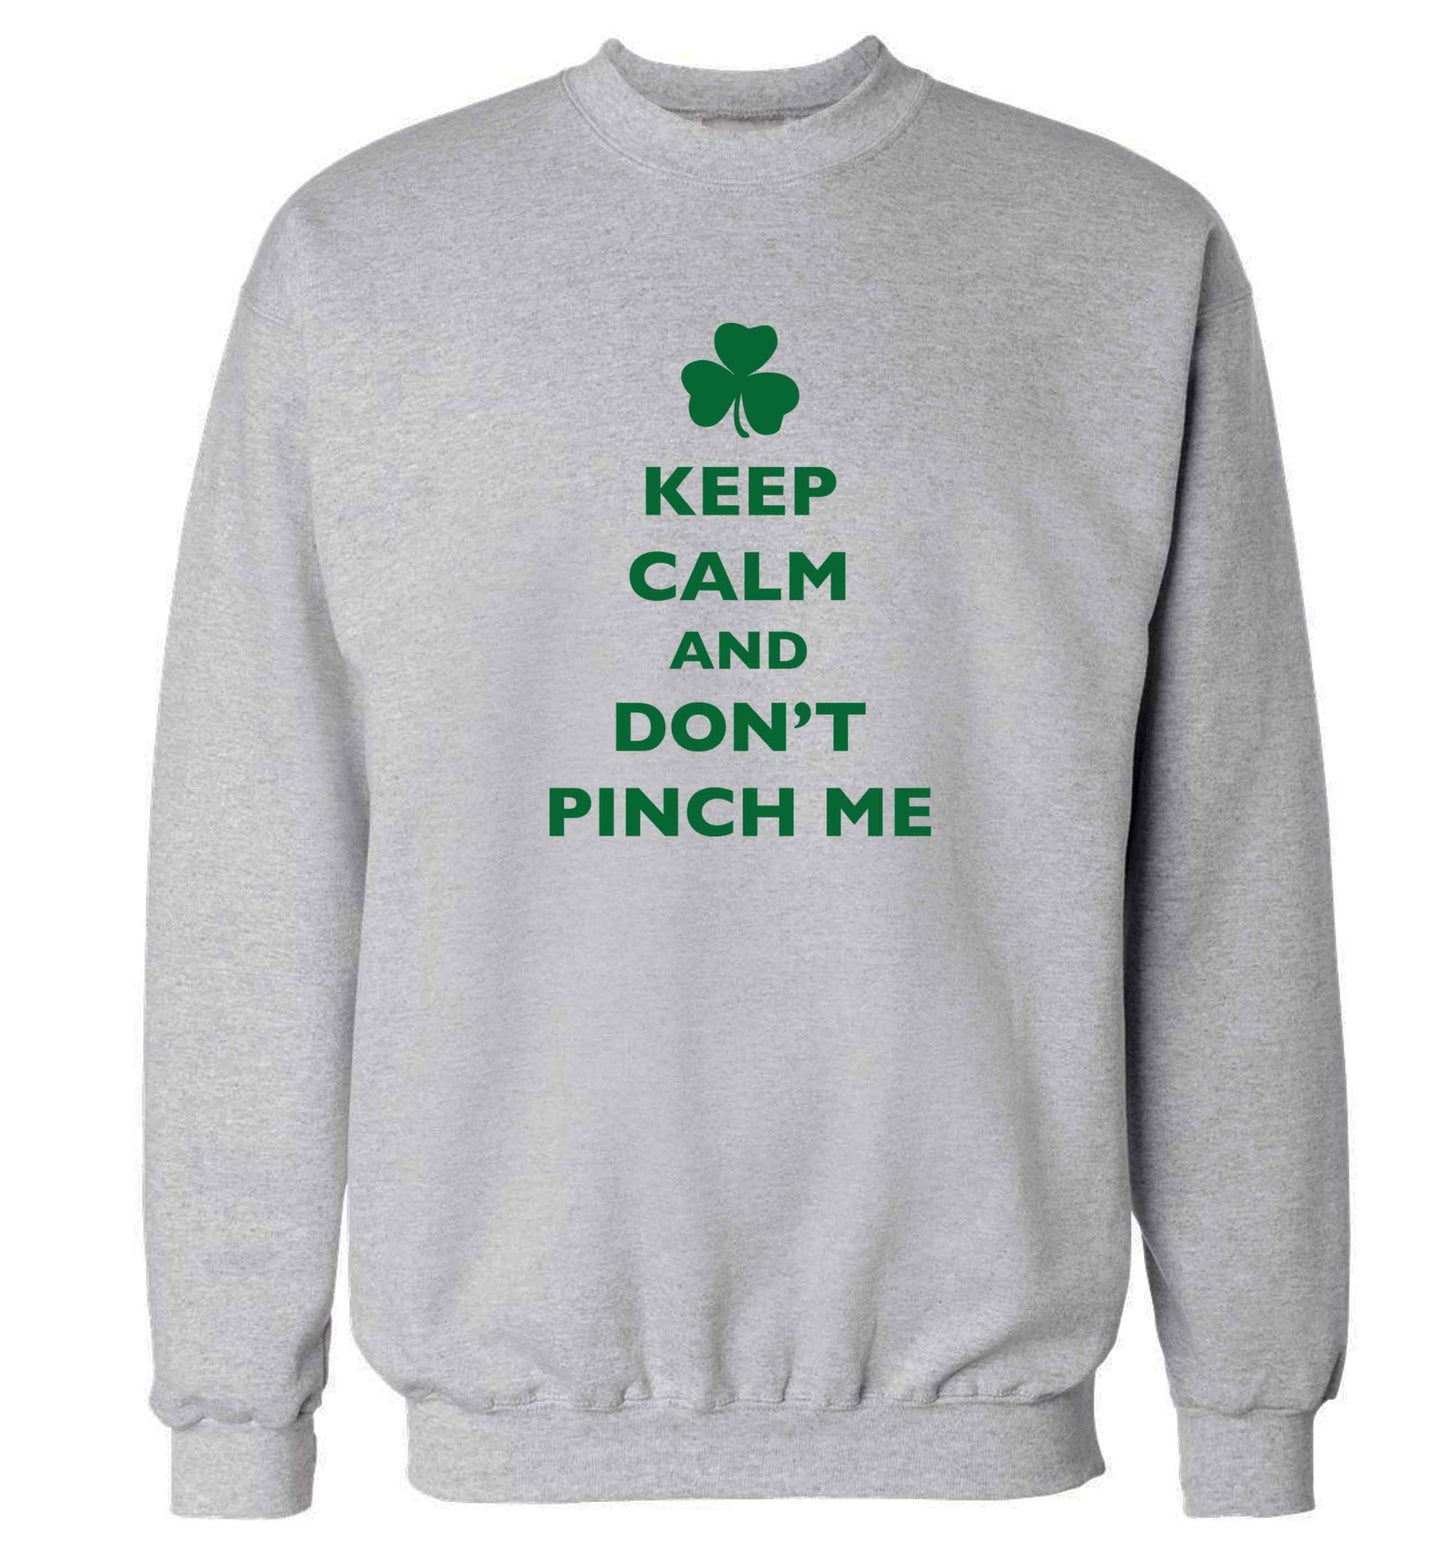 Keep calm and don't pinch me adult's unisex grey sweater 2XL